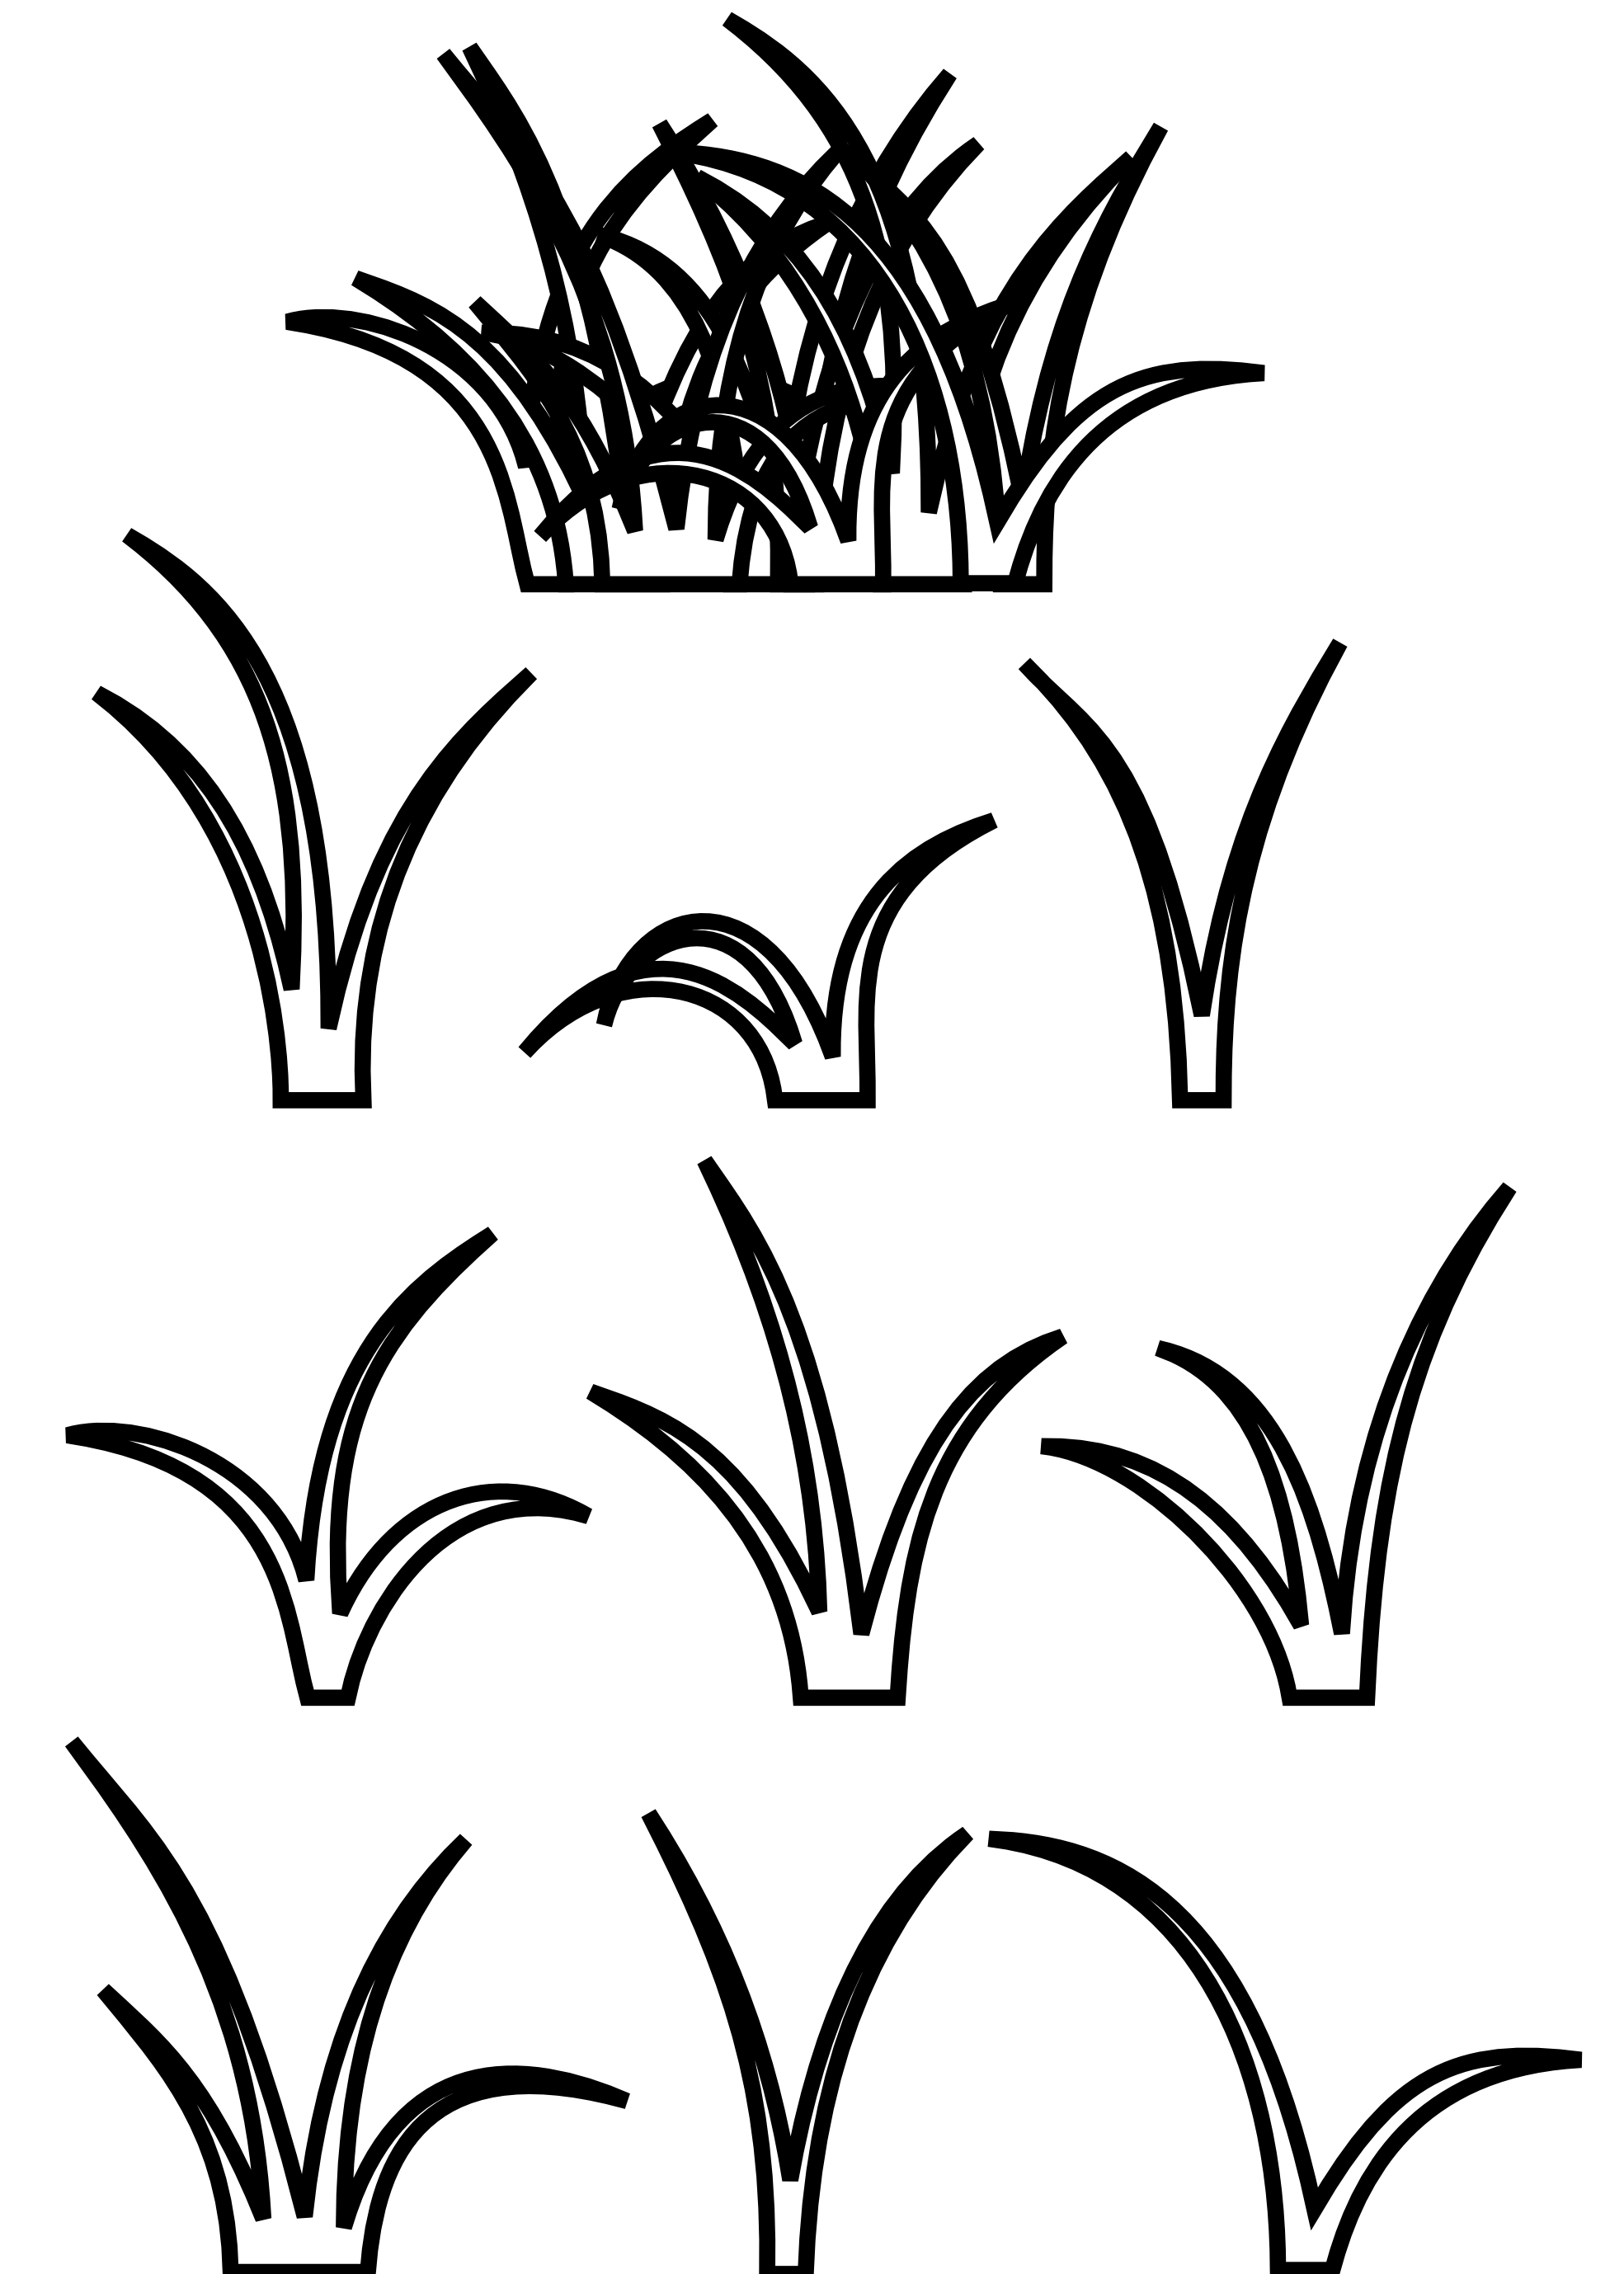 20 Grass Clip Art Free Cliparts That You Can Download To You Computer